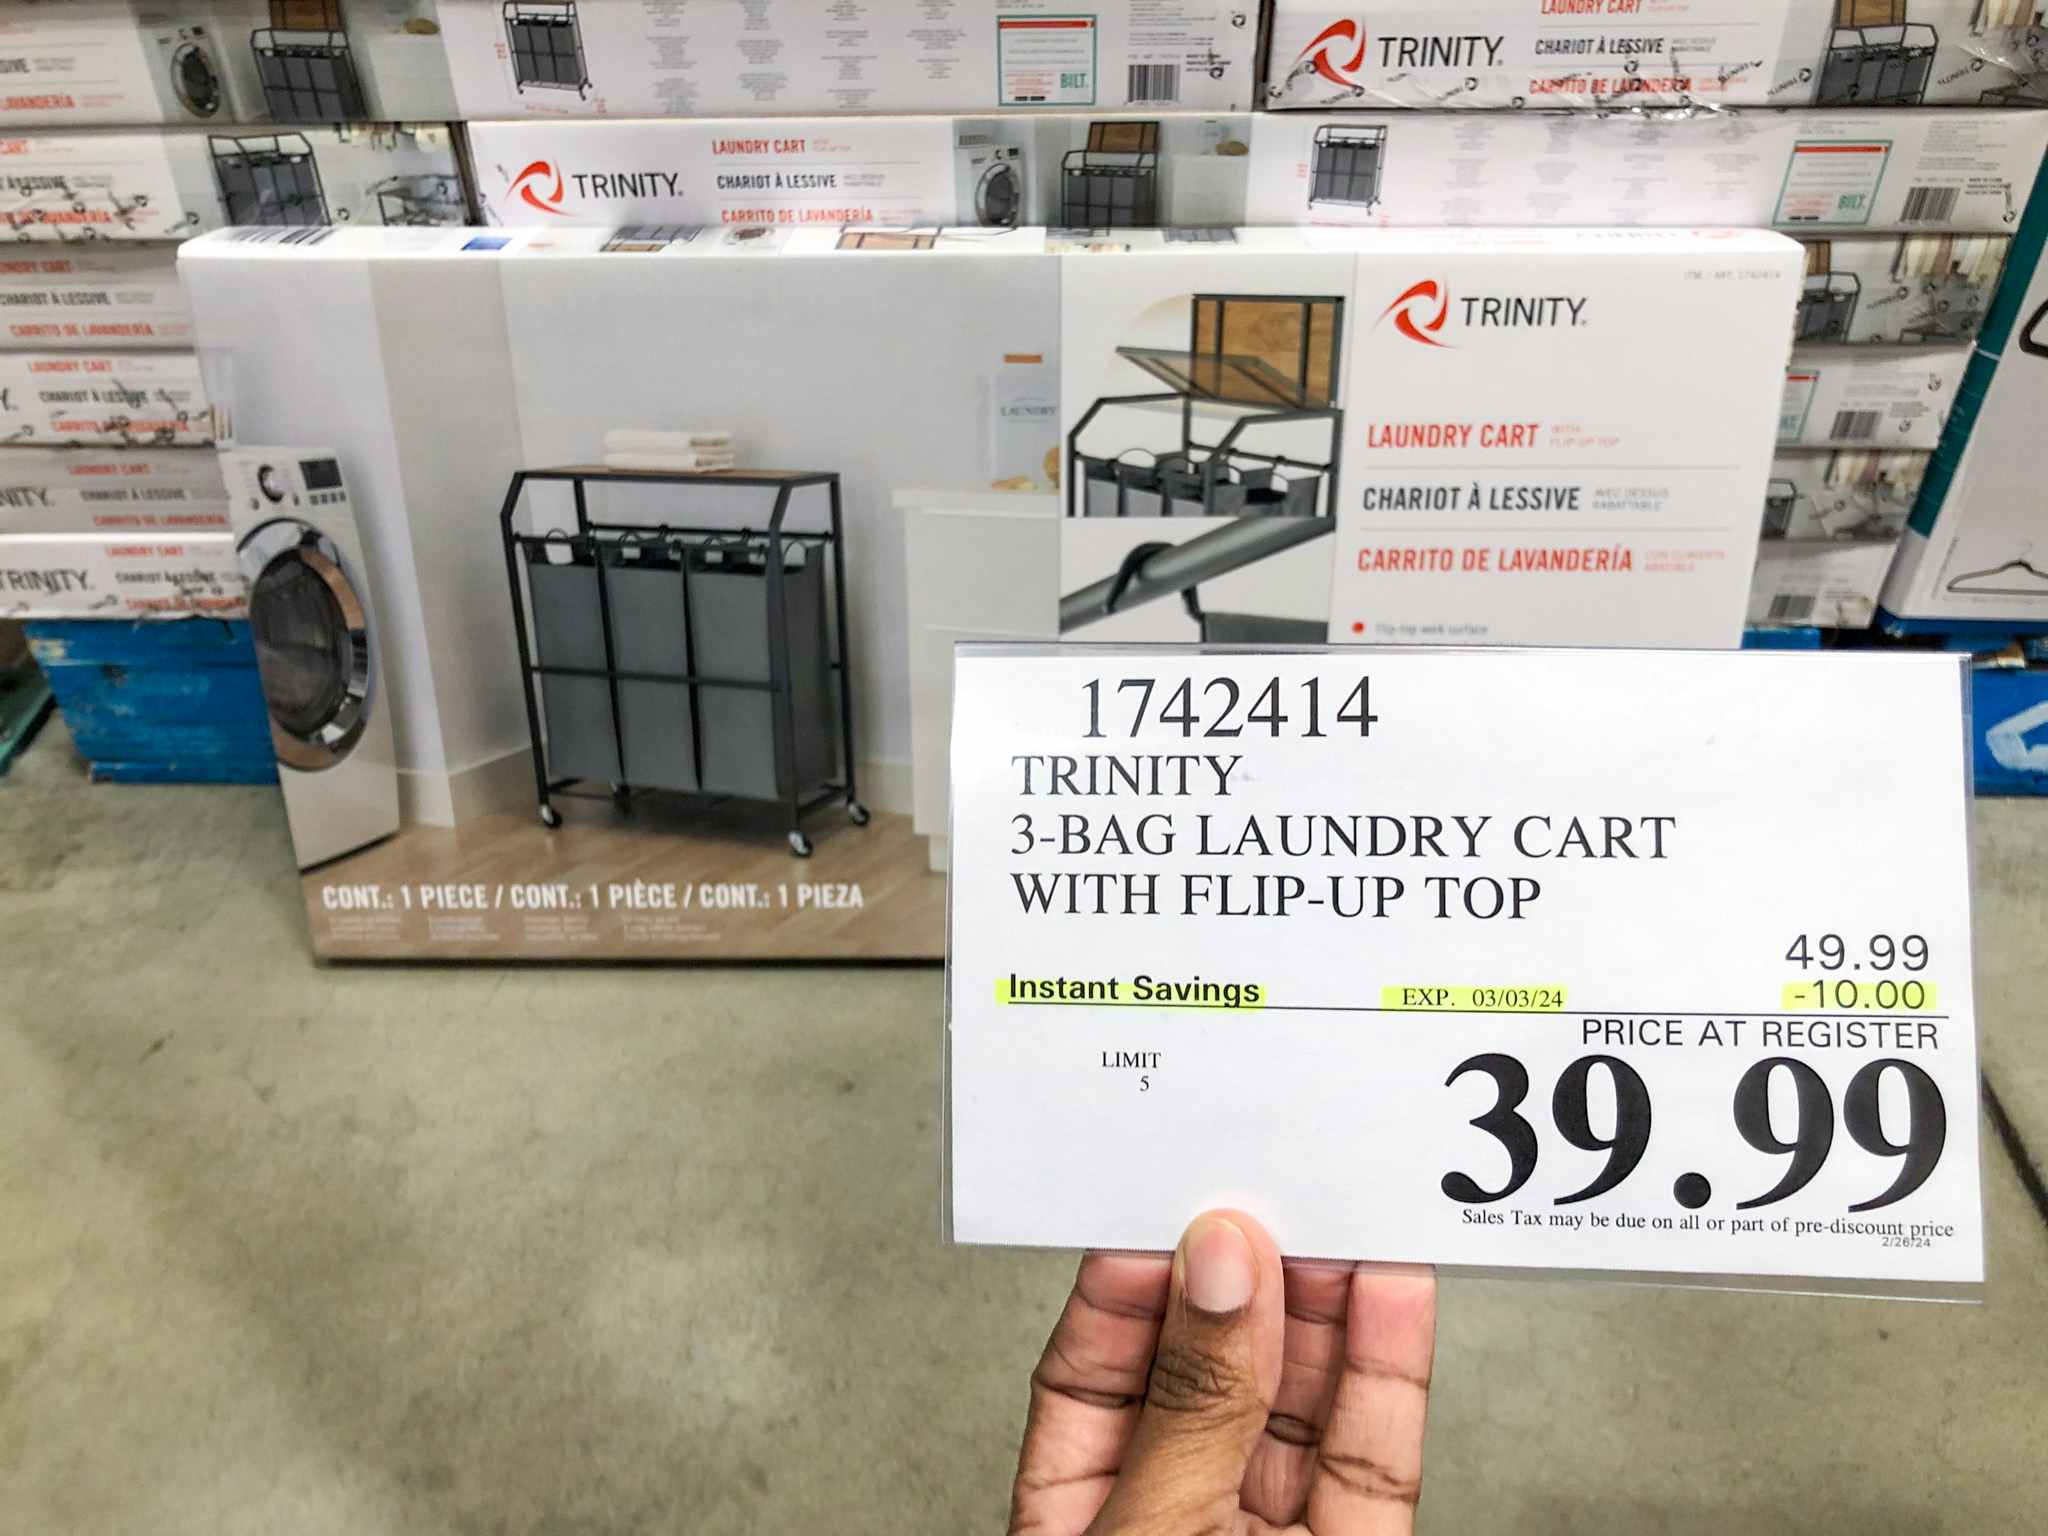 person holding a $39.99 price tag in front of a laundry cart